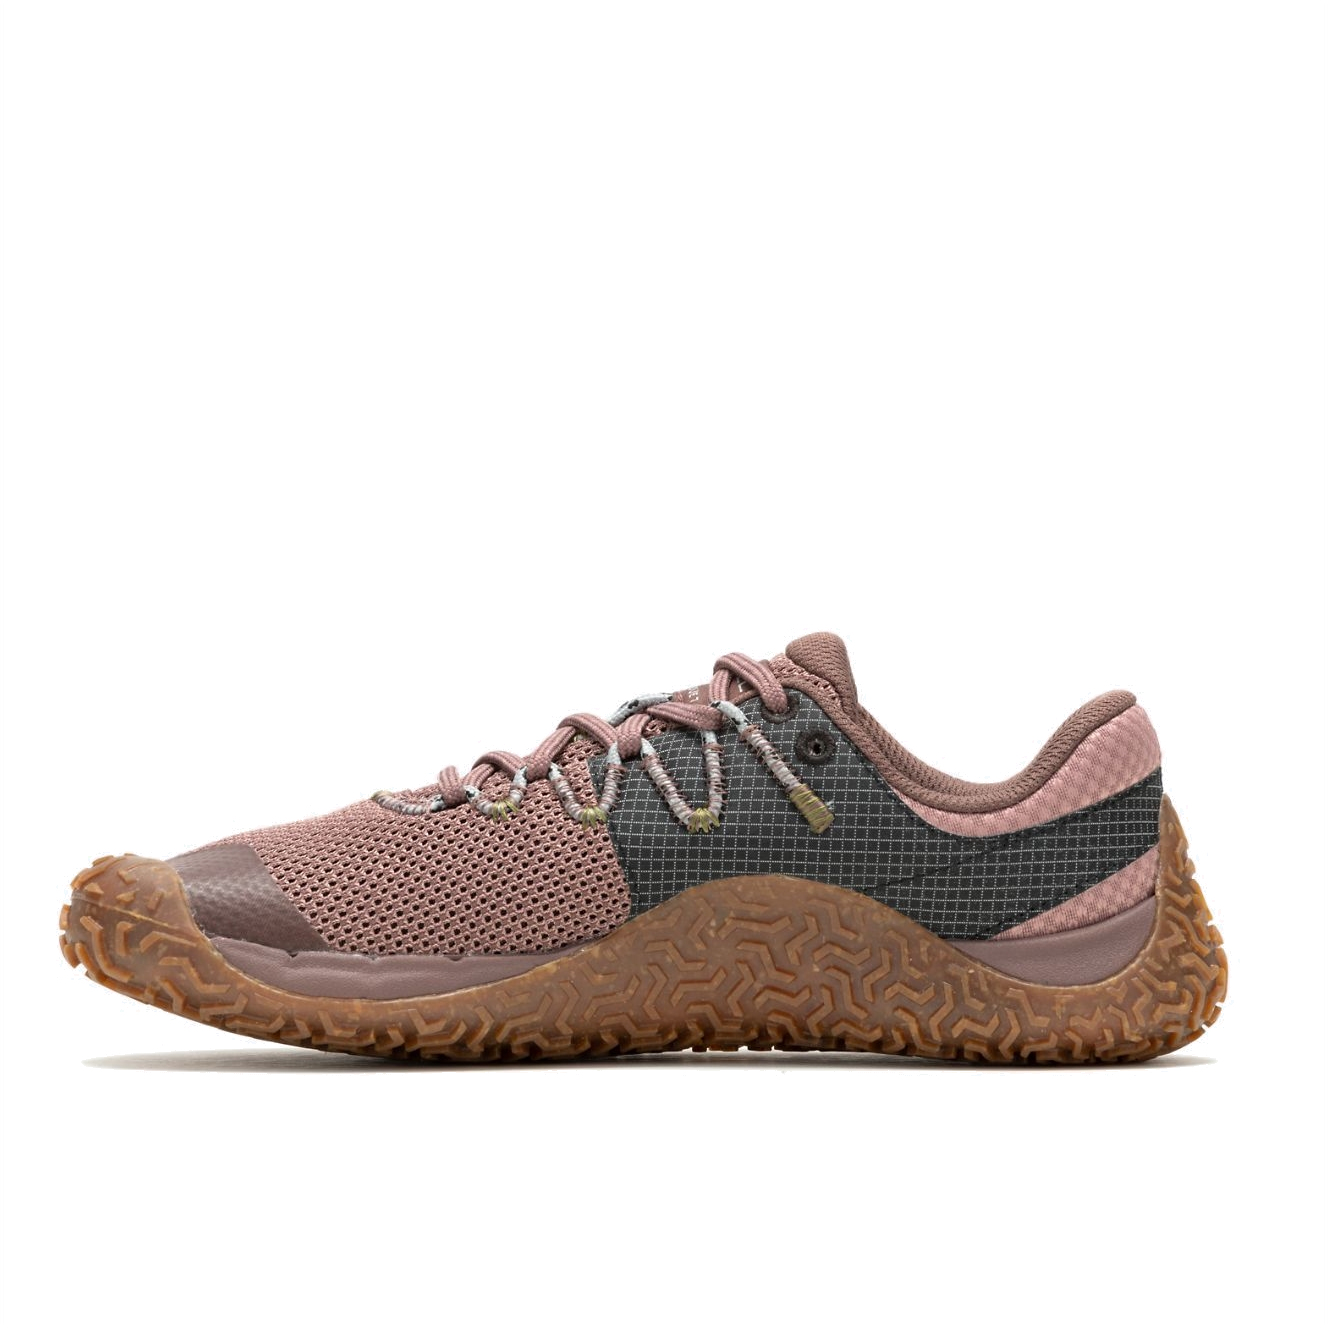 Merrell Zapatillas Barefoot Mujer - Trail Glove 7 - highrise